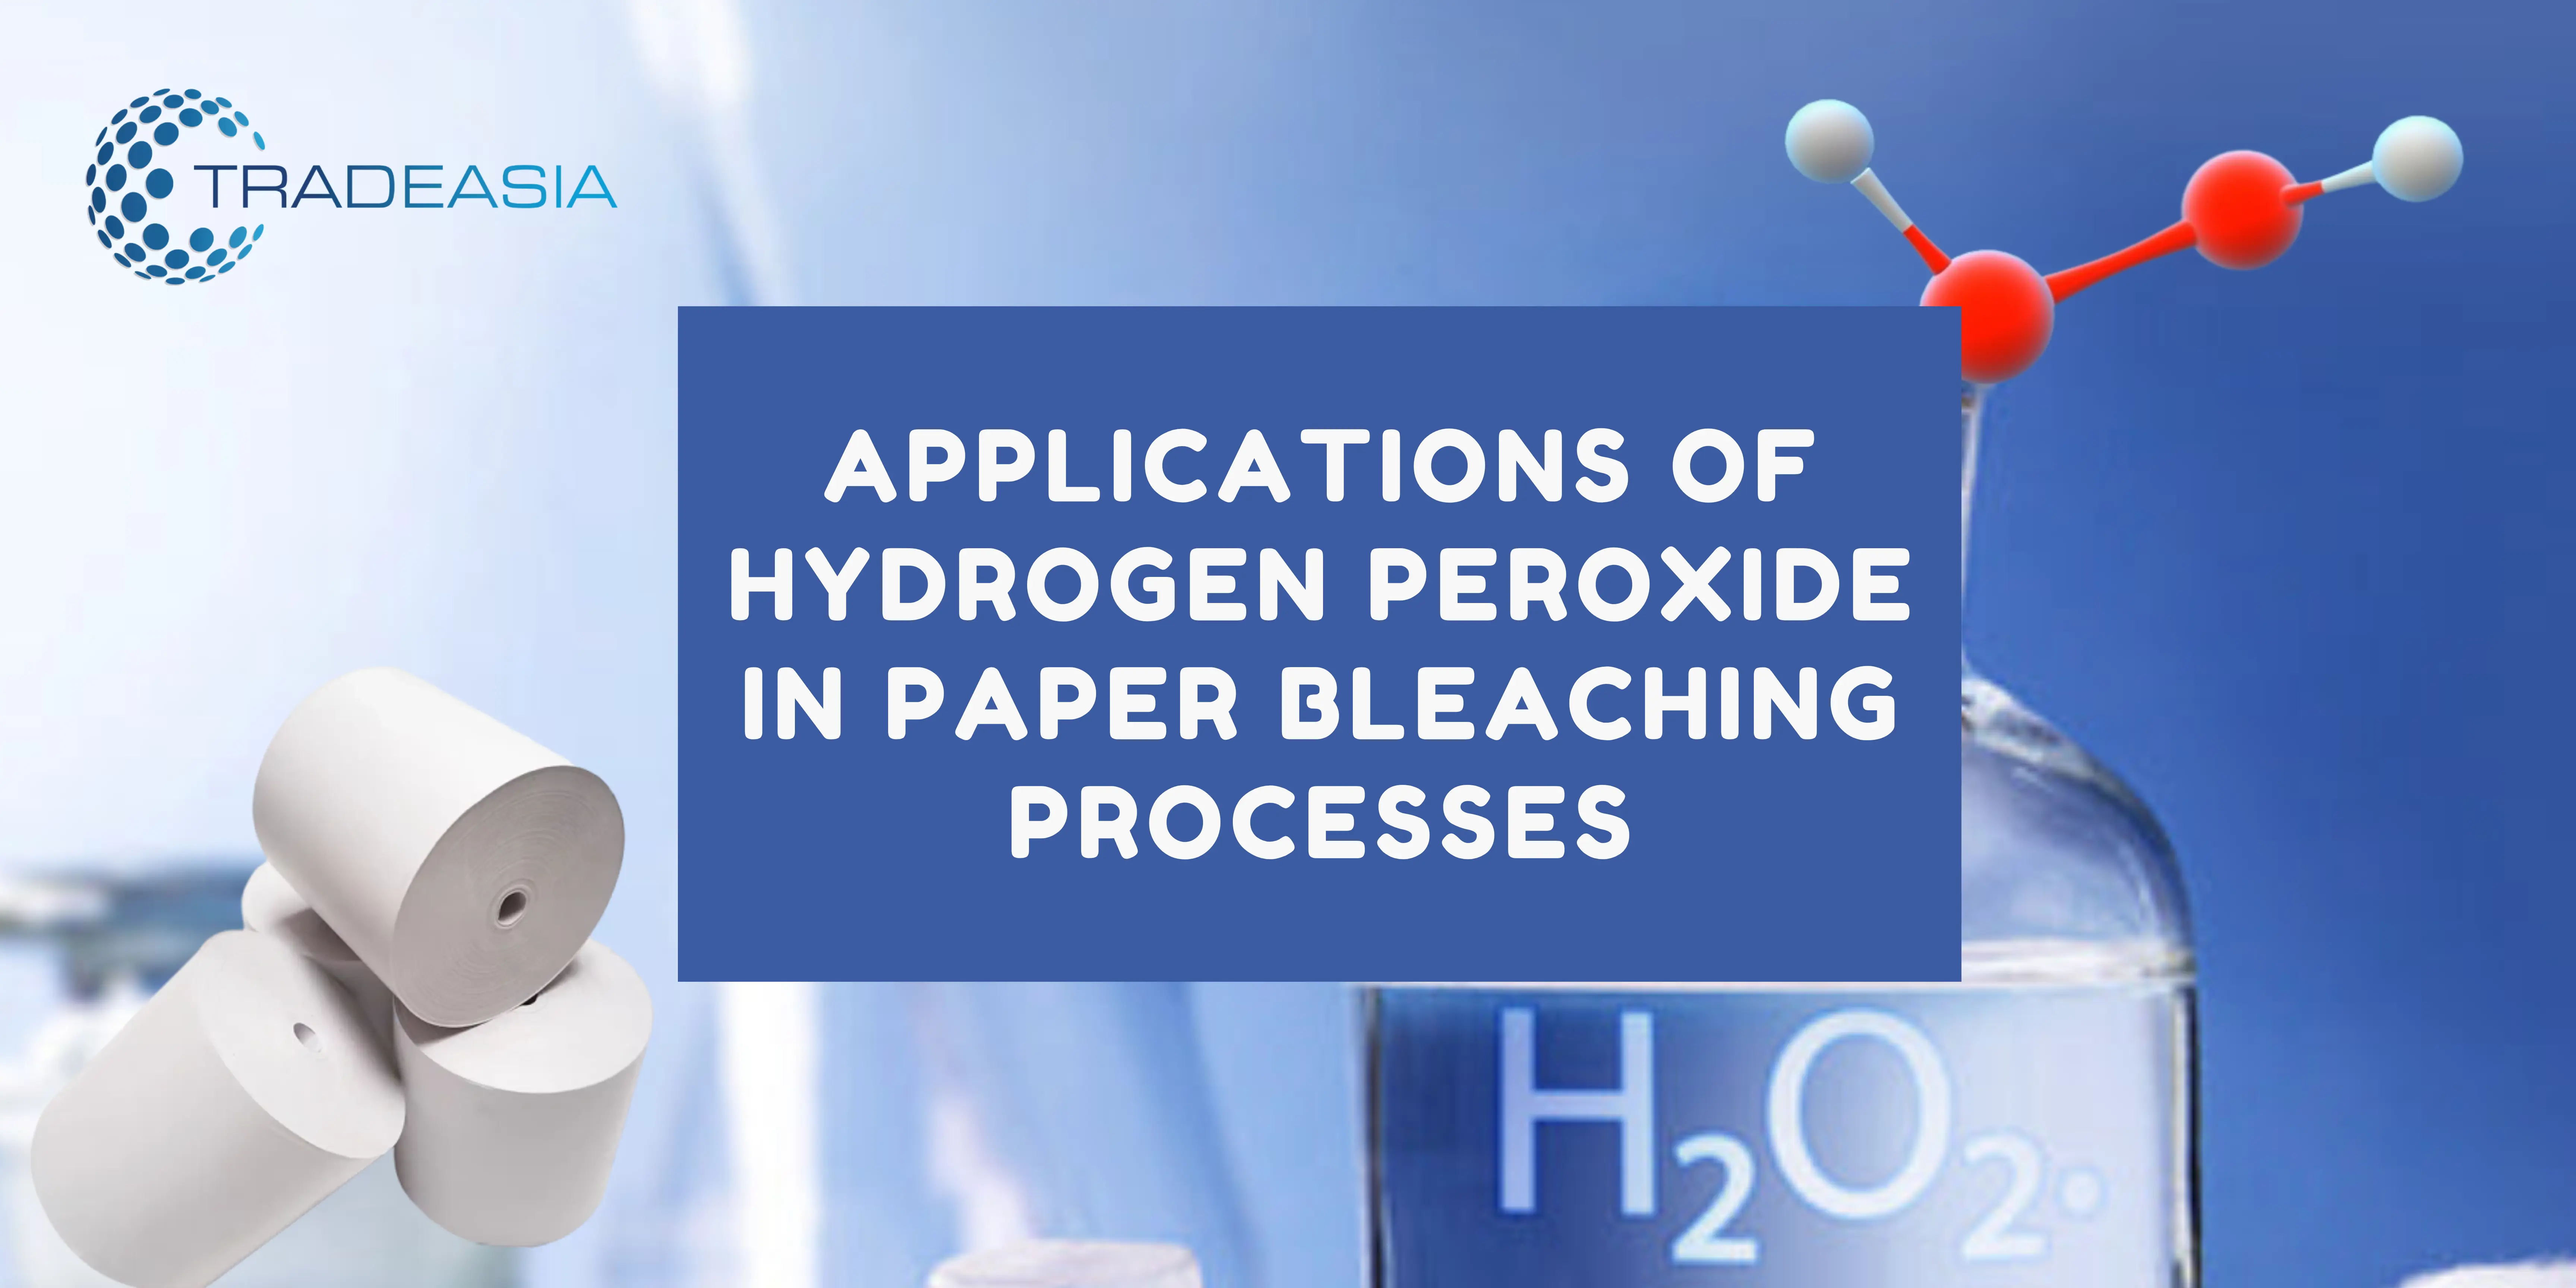 Applications of Hydrogen Peroxide in Paper Bleaching Processes